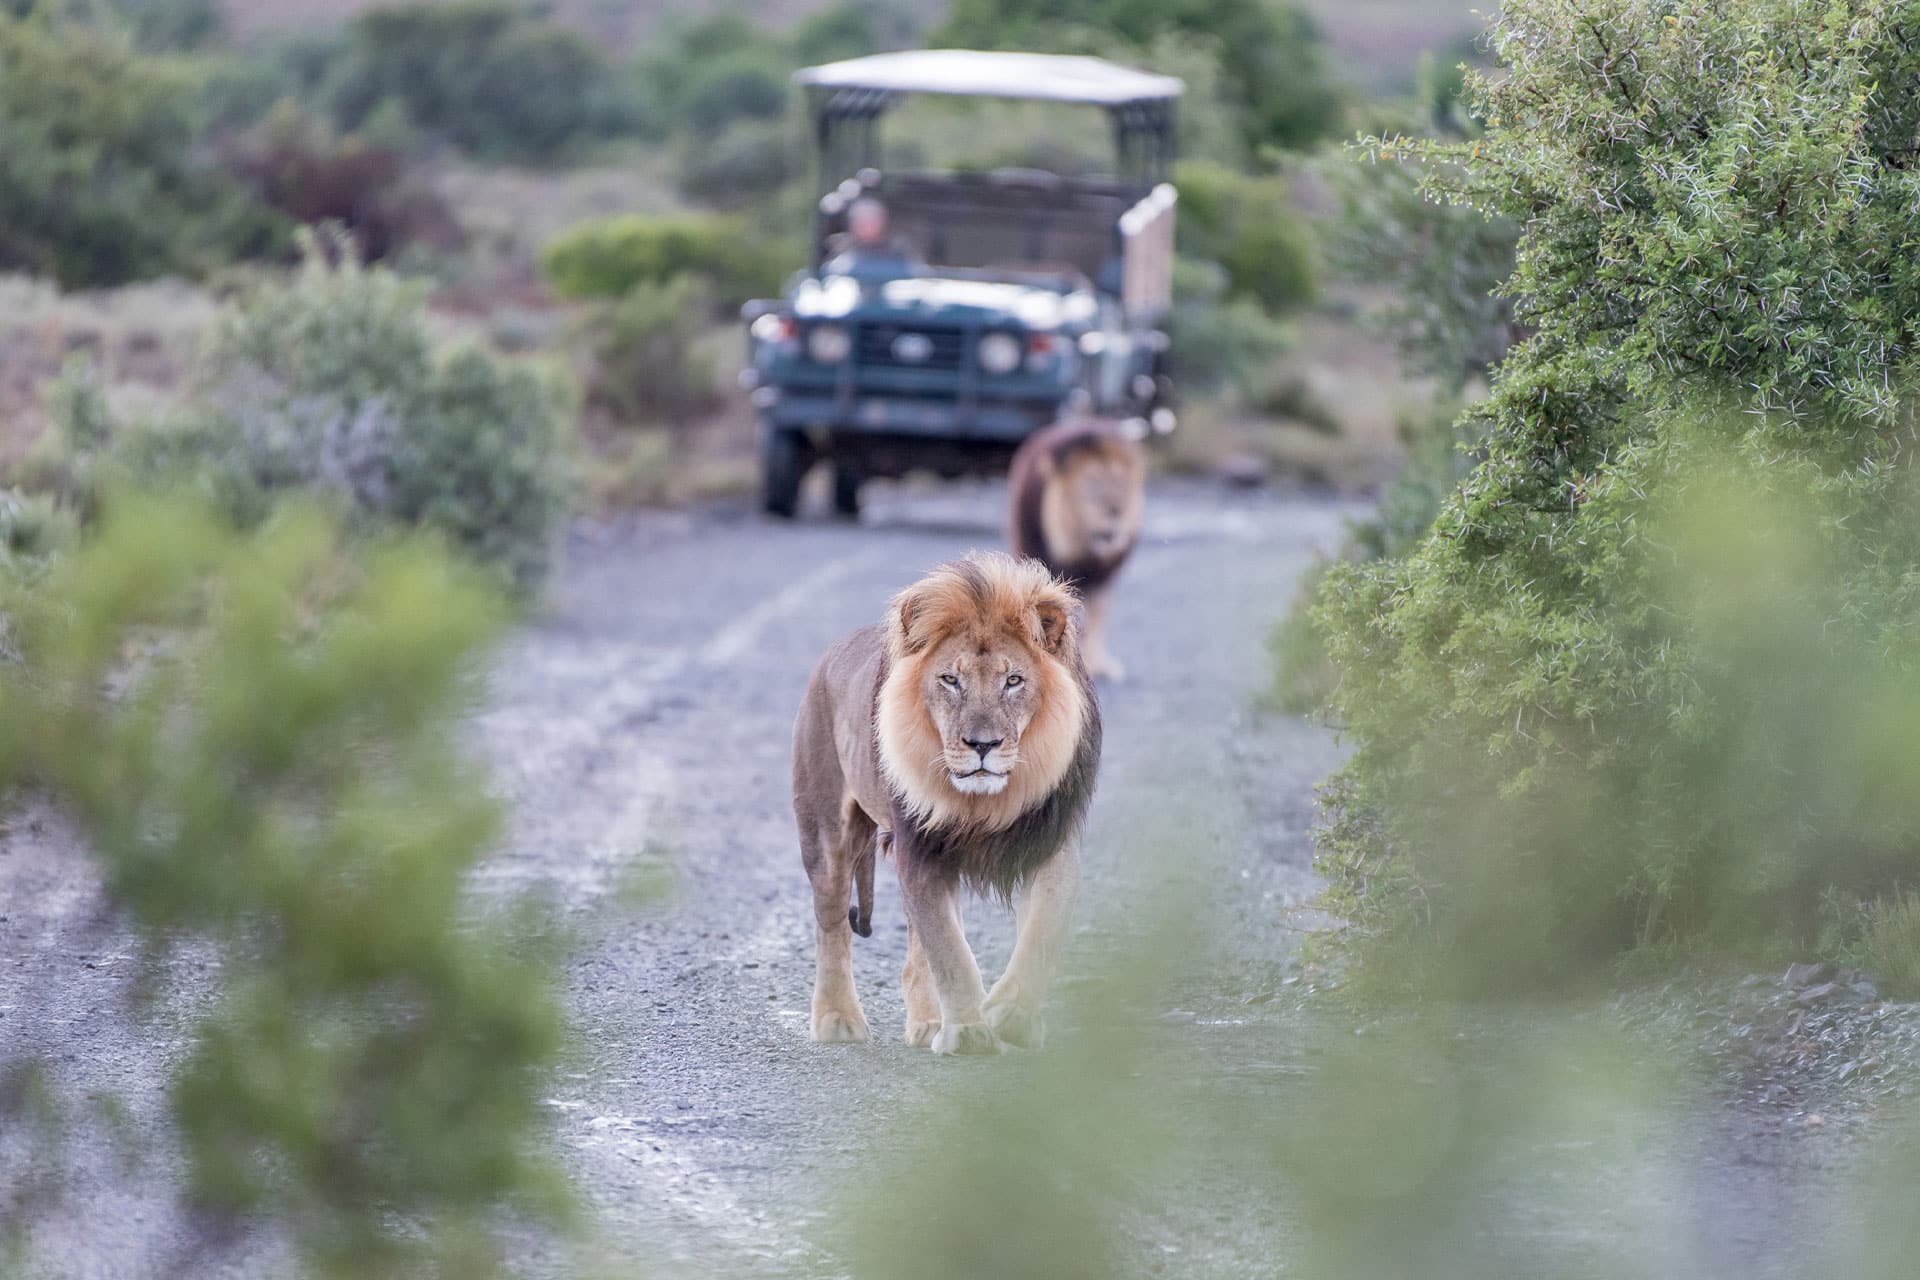 A lion spotted on a safari in the Sabi Sands Game Reserve, South Africa – one of the top honeymoon destinations in Africa.